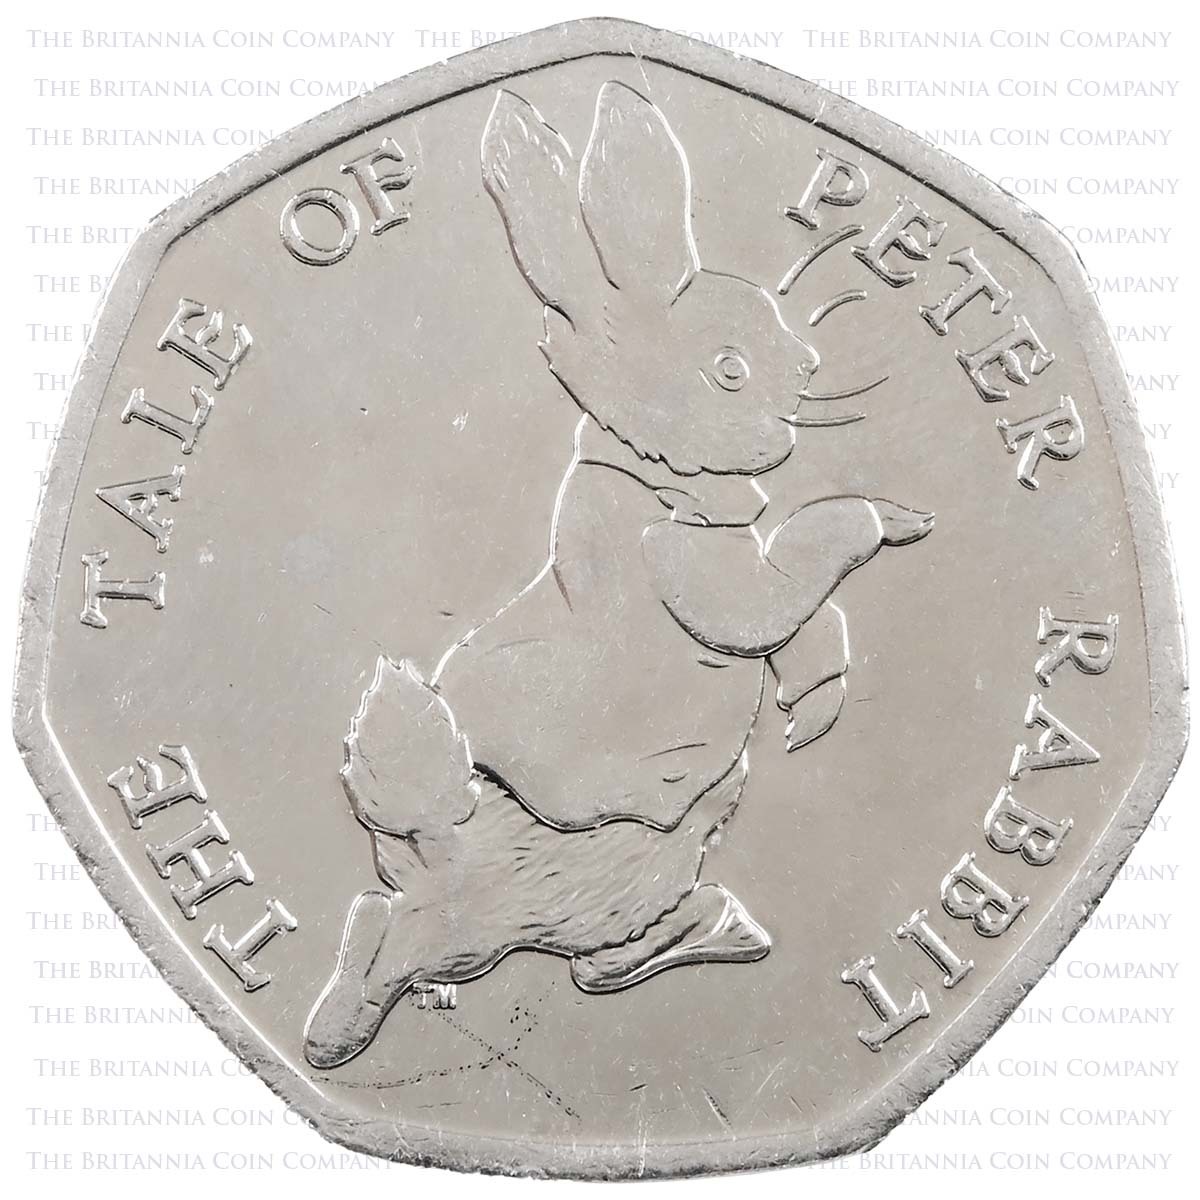 2017 Beatrix Potter Peter Rabbit Circulated Fifty Pence Coin Reverse